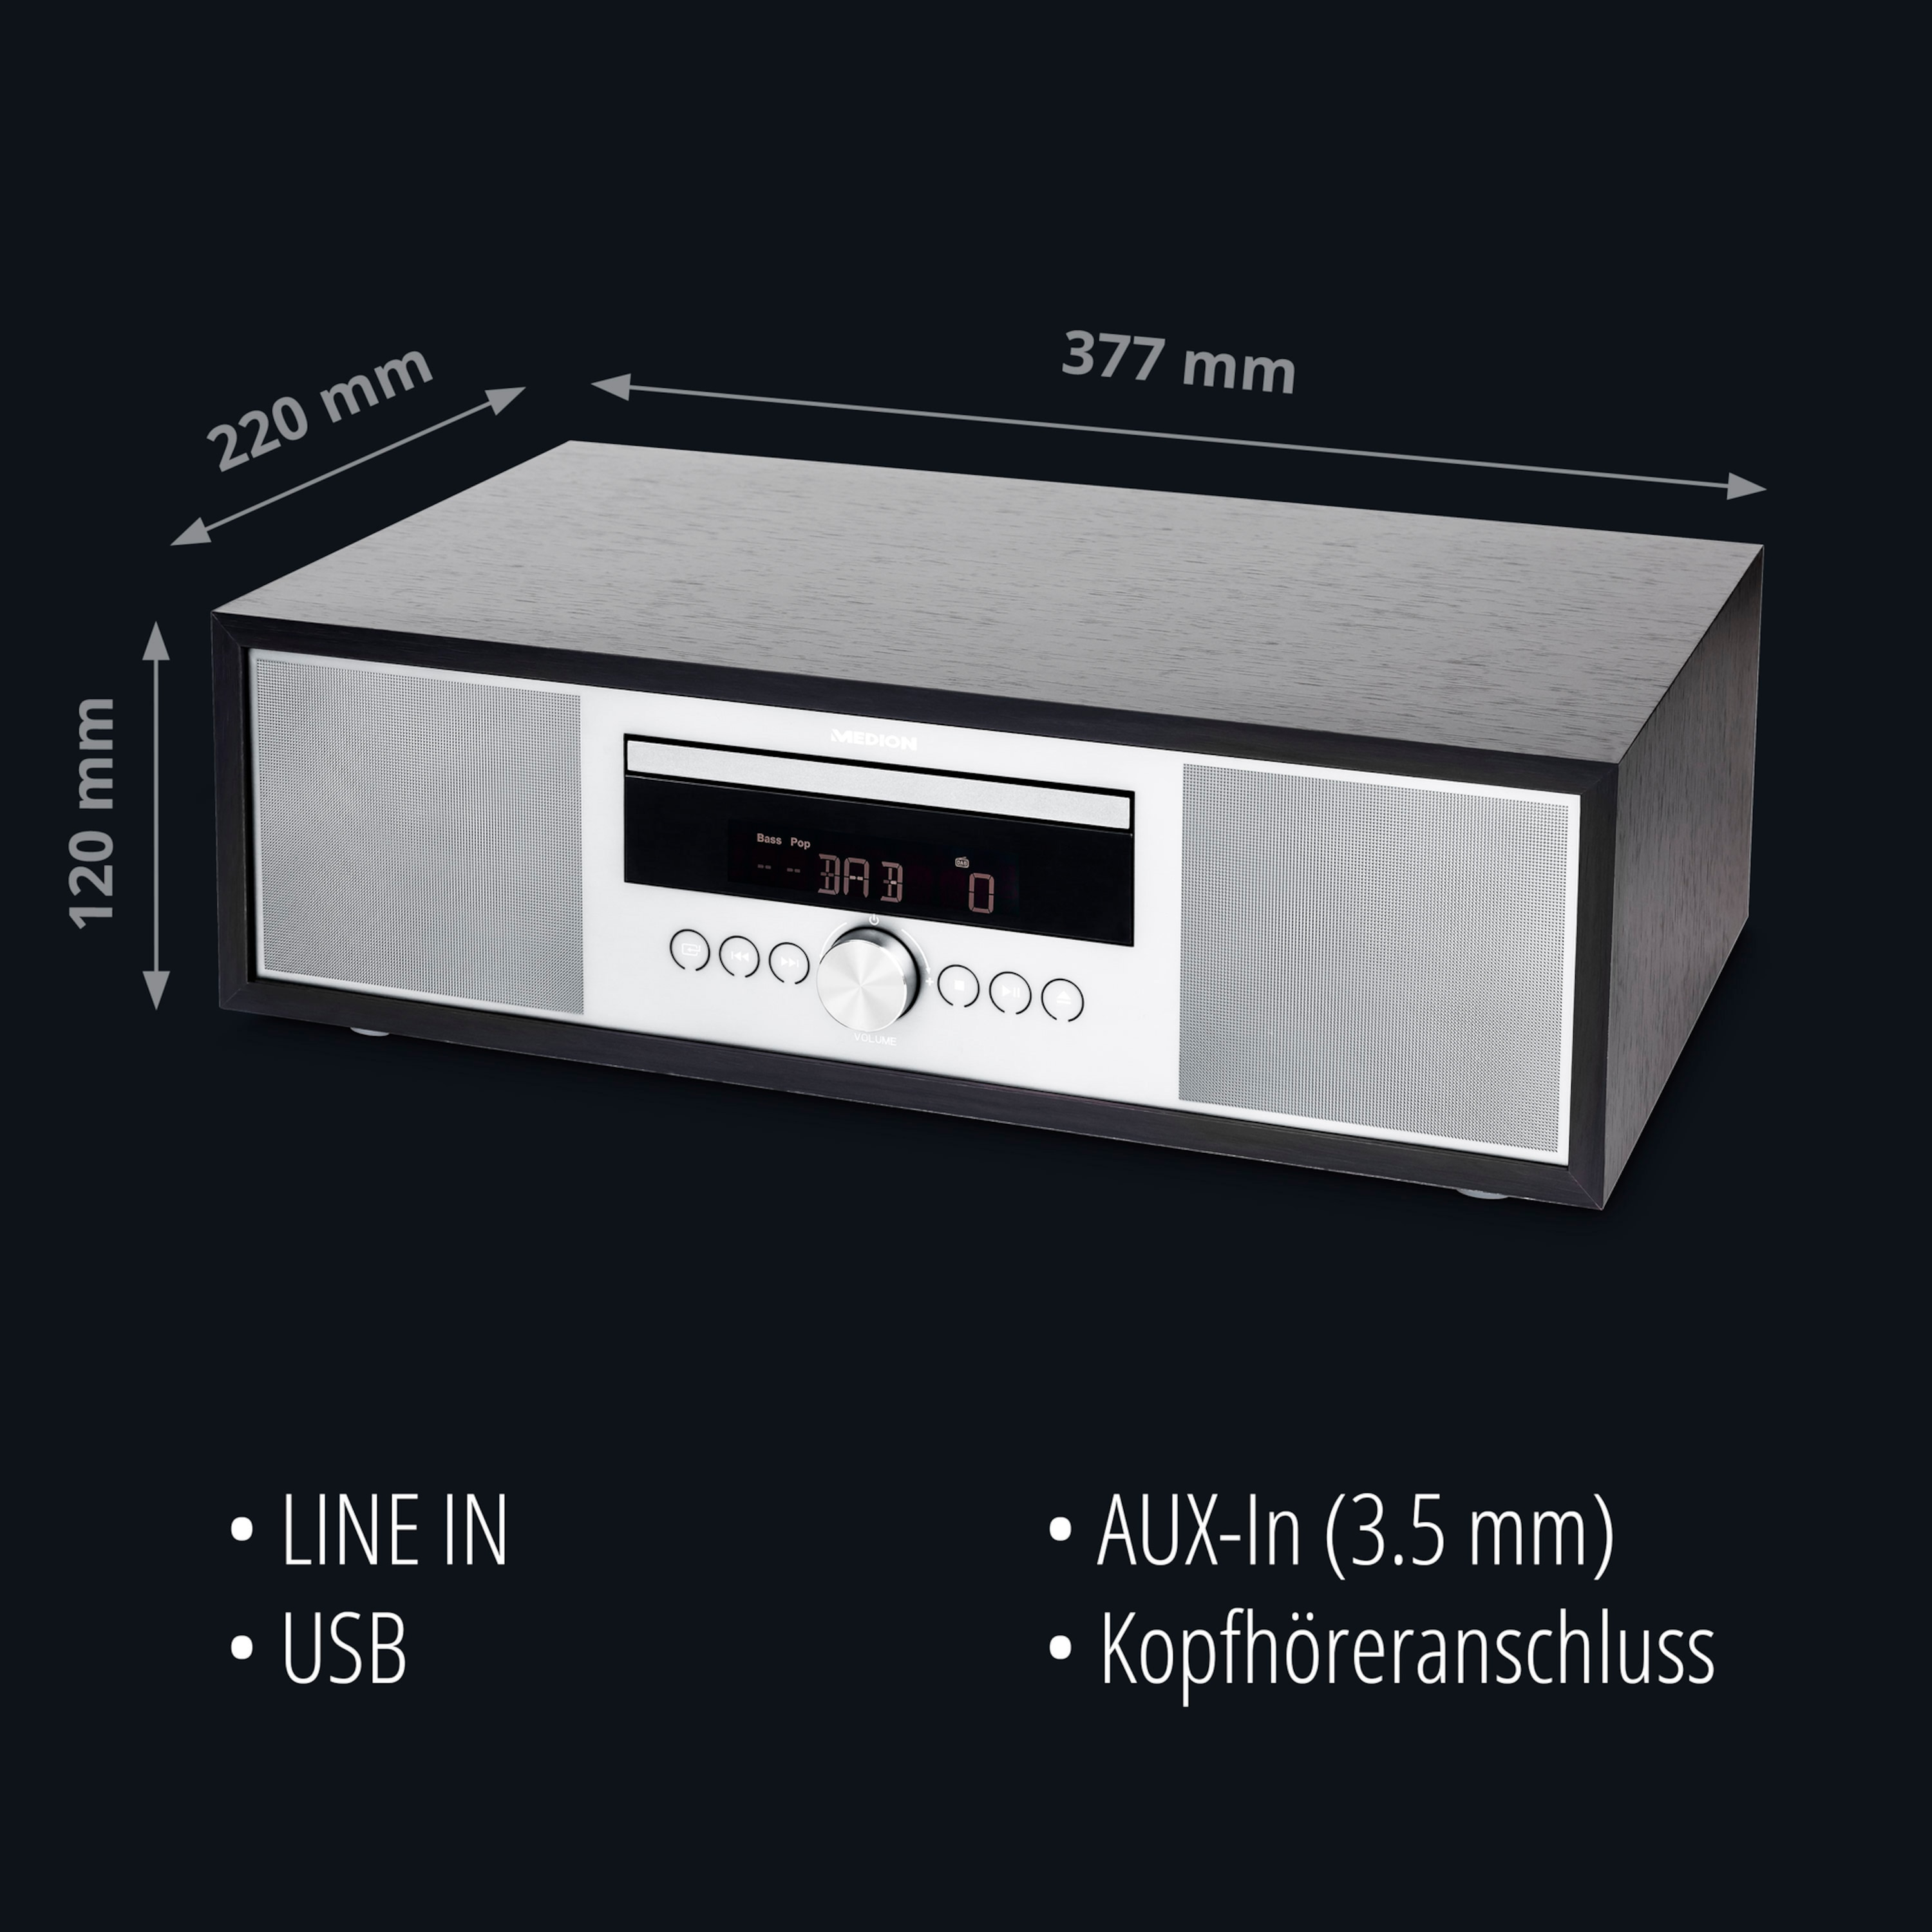 2 15 RMS All-in-One MEDION P64145, DAB+/PLL-UKW Radio CD/MP3-Player, LIFE® USB, W x Bluetooth®, Stereo-Radio, silber